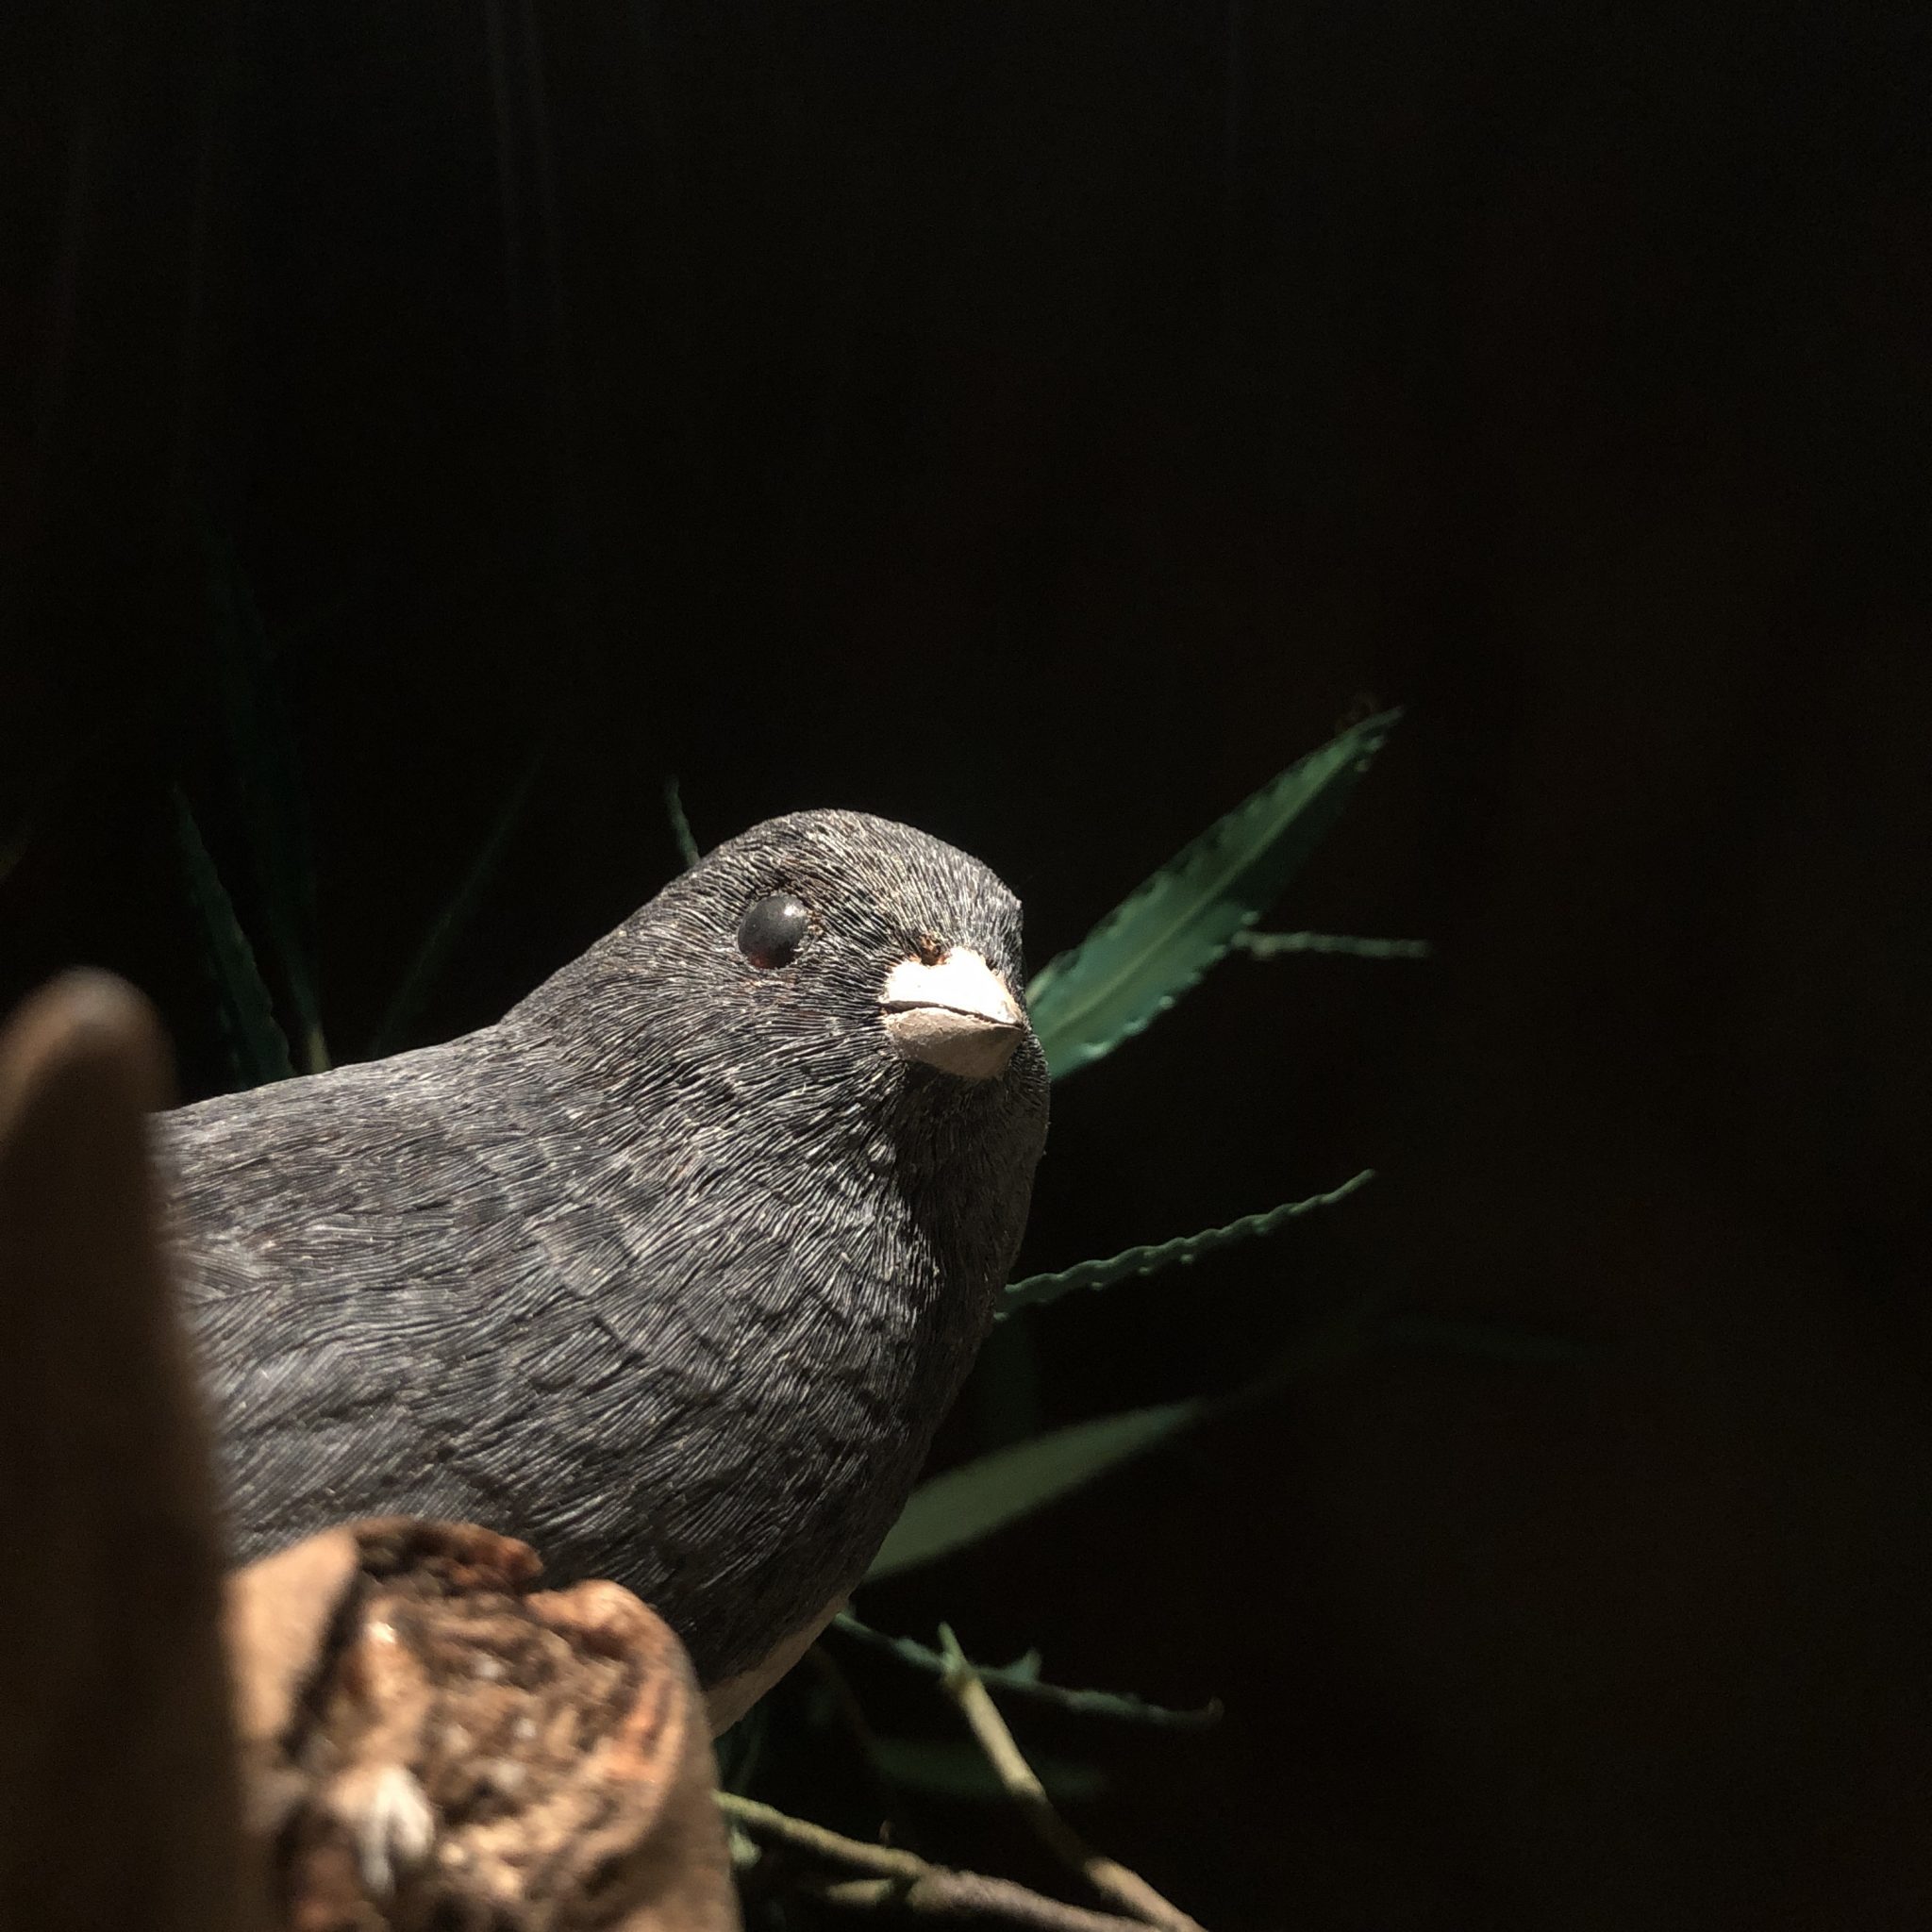 Dark-eyed Junco woodcarving by Bob Spear. Gray songbird with chunky pale pink beak is seen in 3/4 view, with lower part of body and tail obscured. Background is black, with a partial green leaf (made of metal) behind the bird.